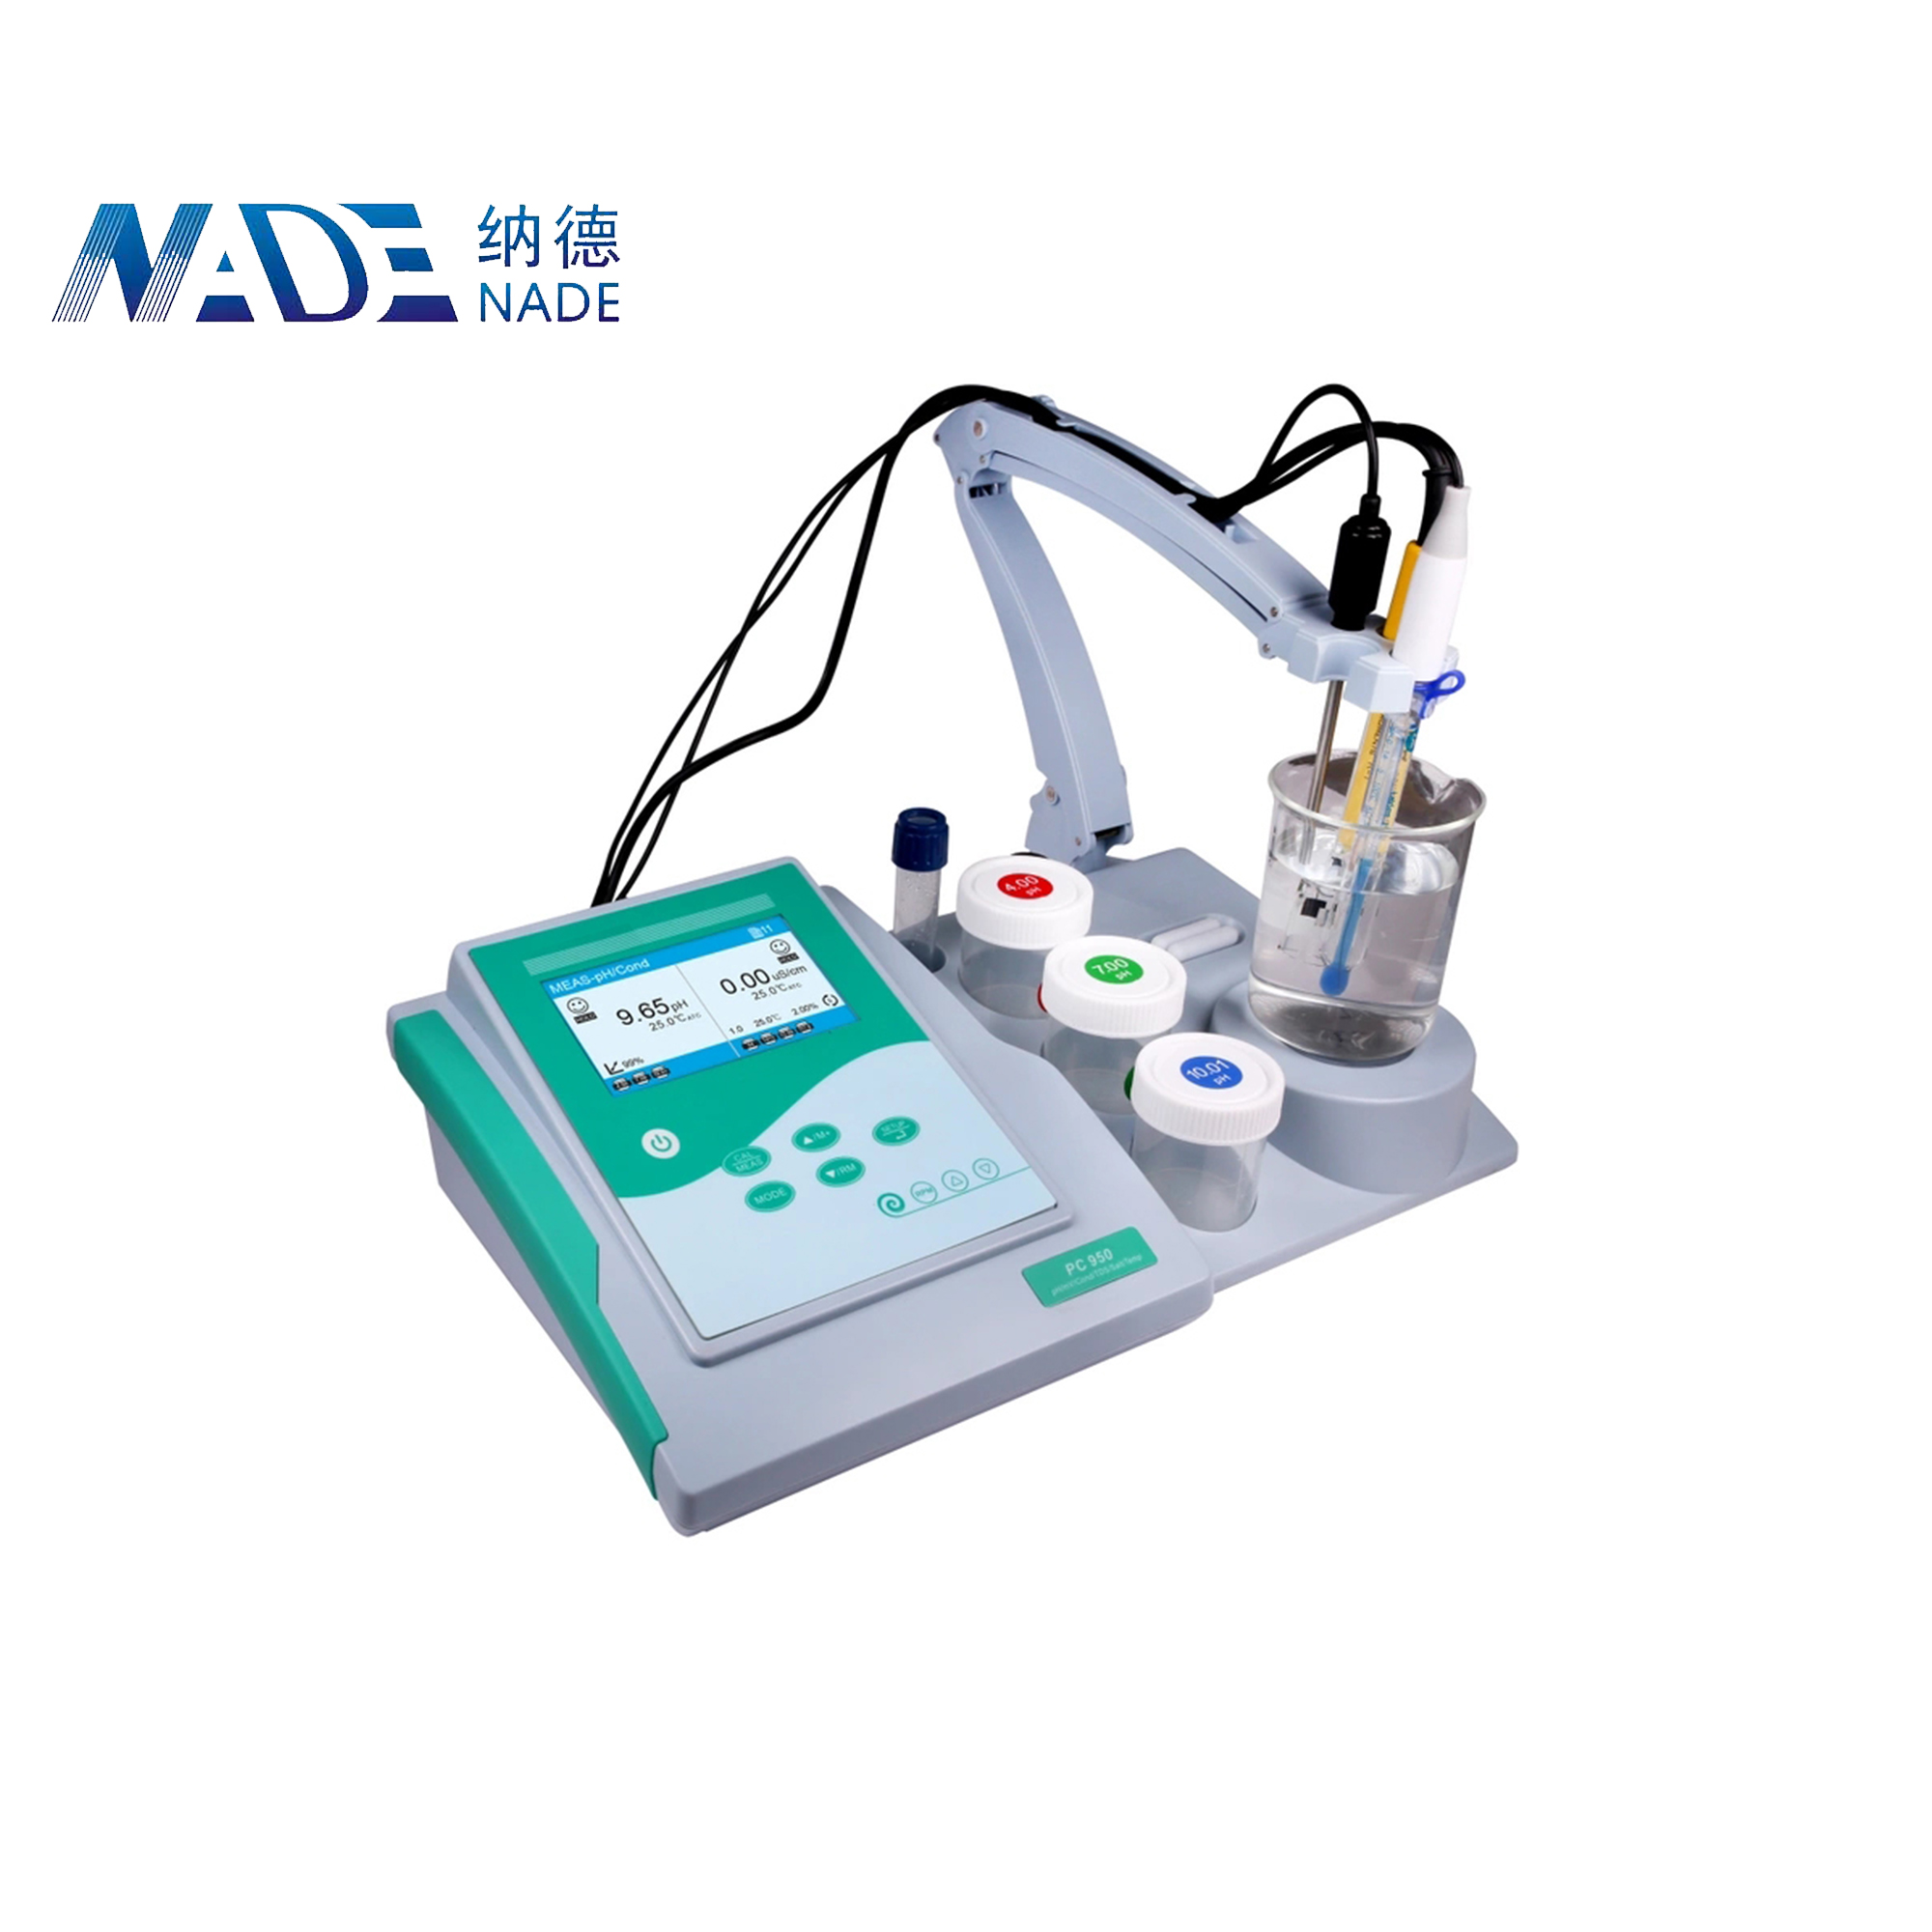 NADE PC950 Benchtop pH/Conductivity Meter 0.00-14.00pH/0-200.0mS/cm with Data storage